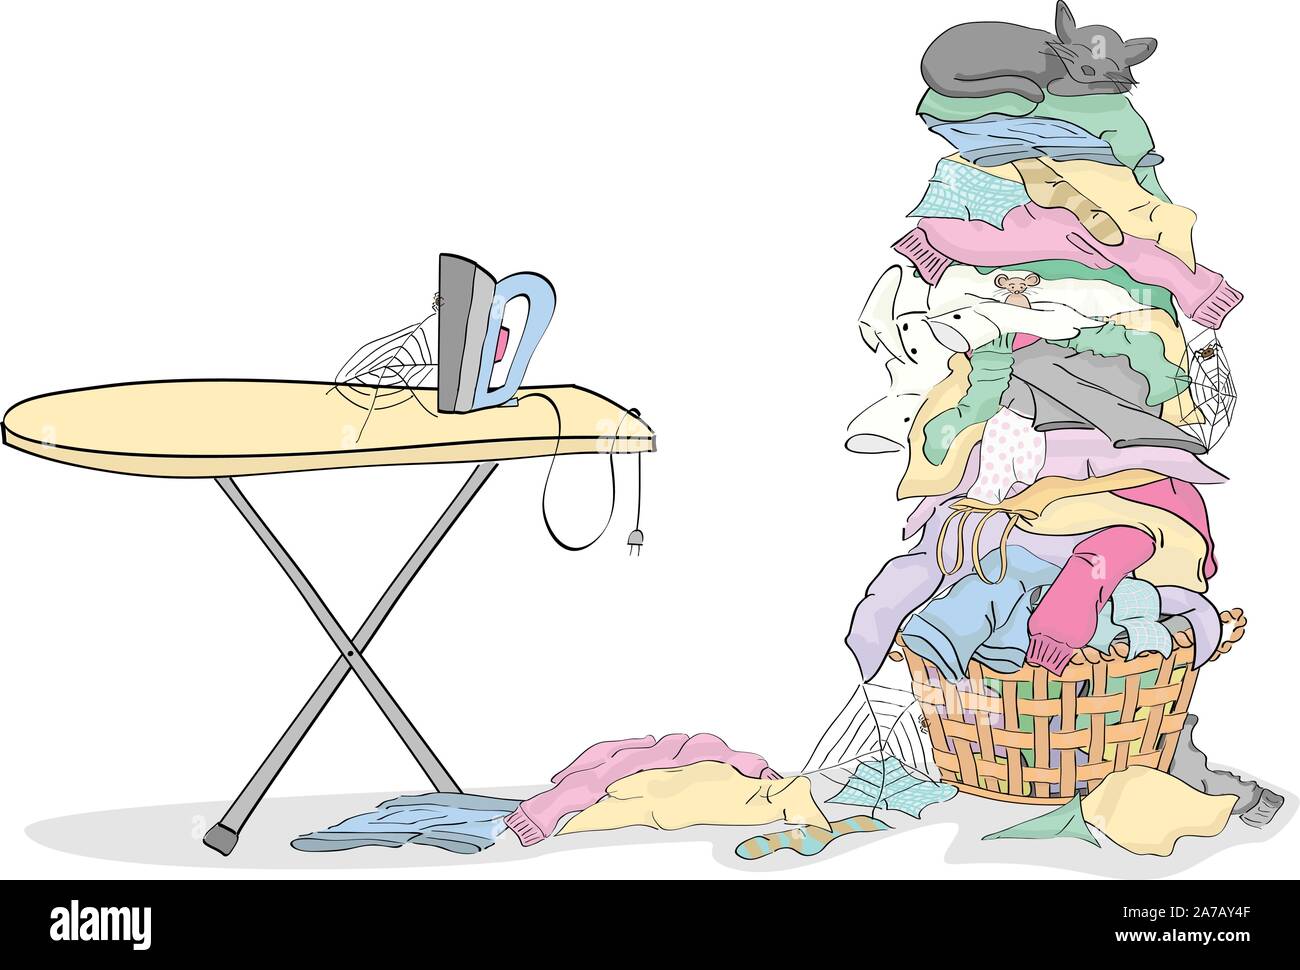 Iron and ironing board with Tall Pile of Laundry in Basket with Cat and Critters - grouped easy to edit Stock Vector